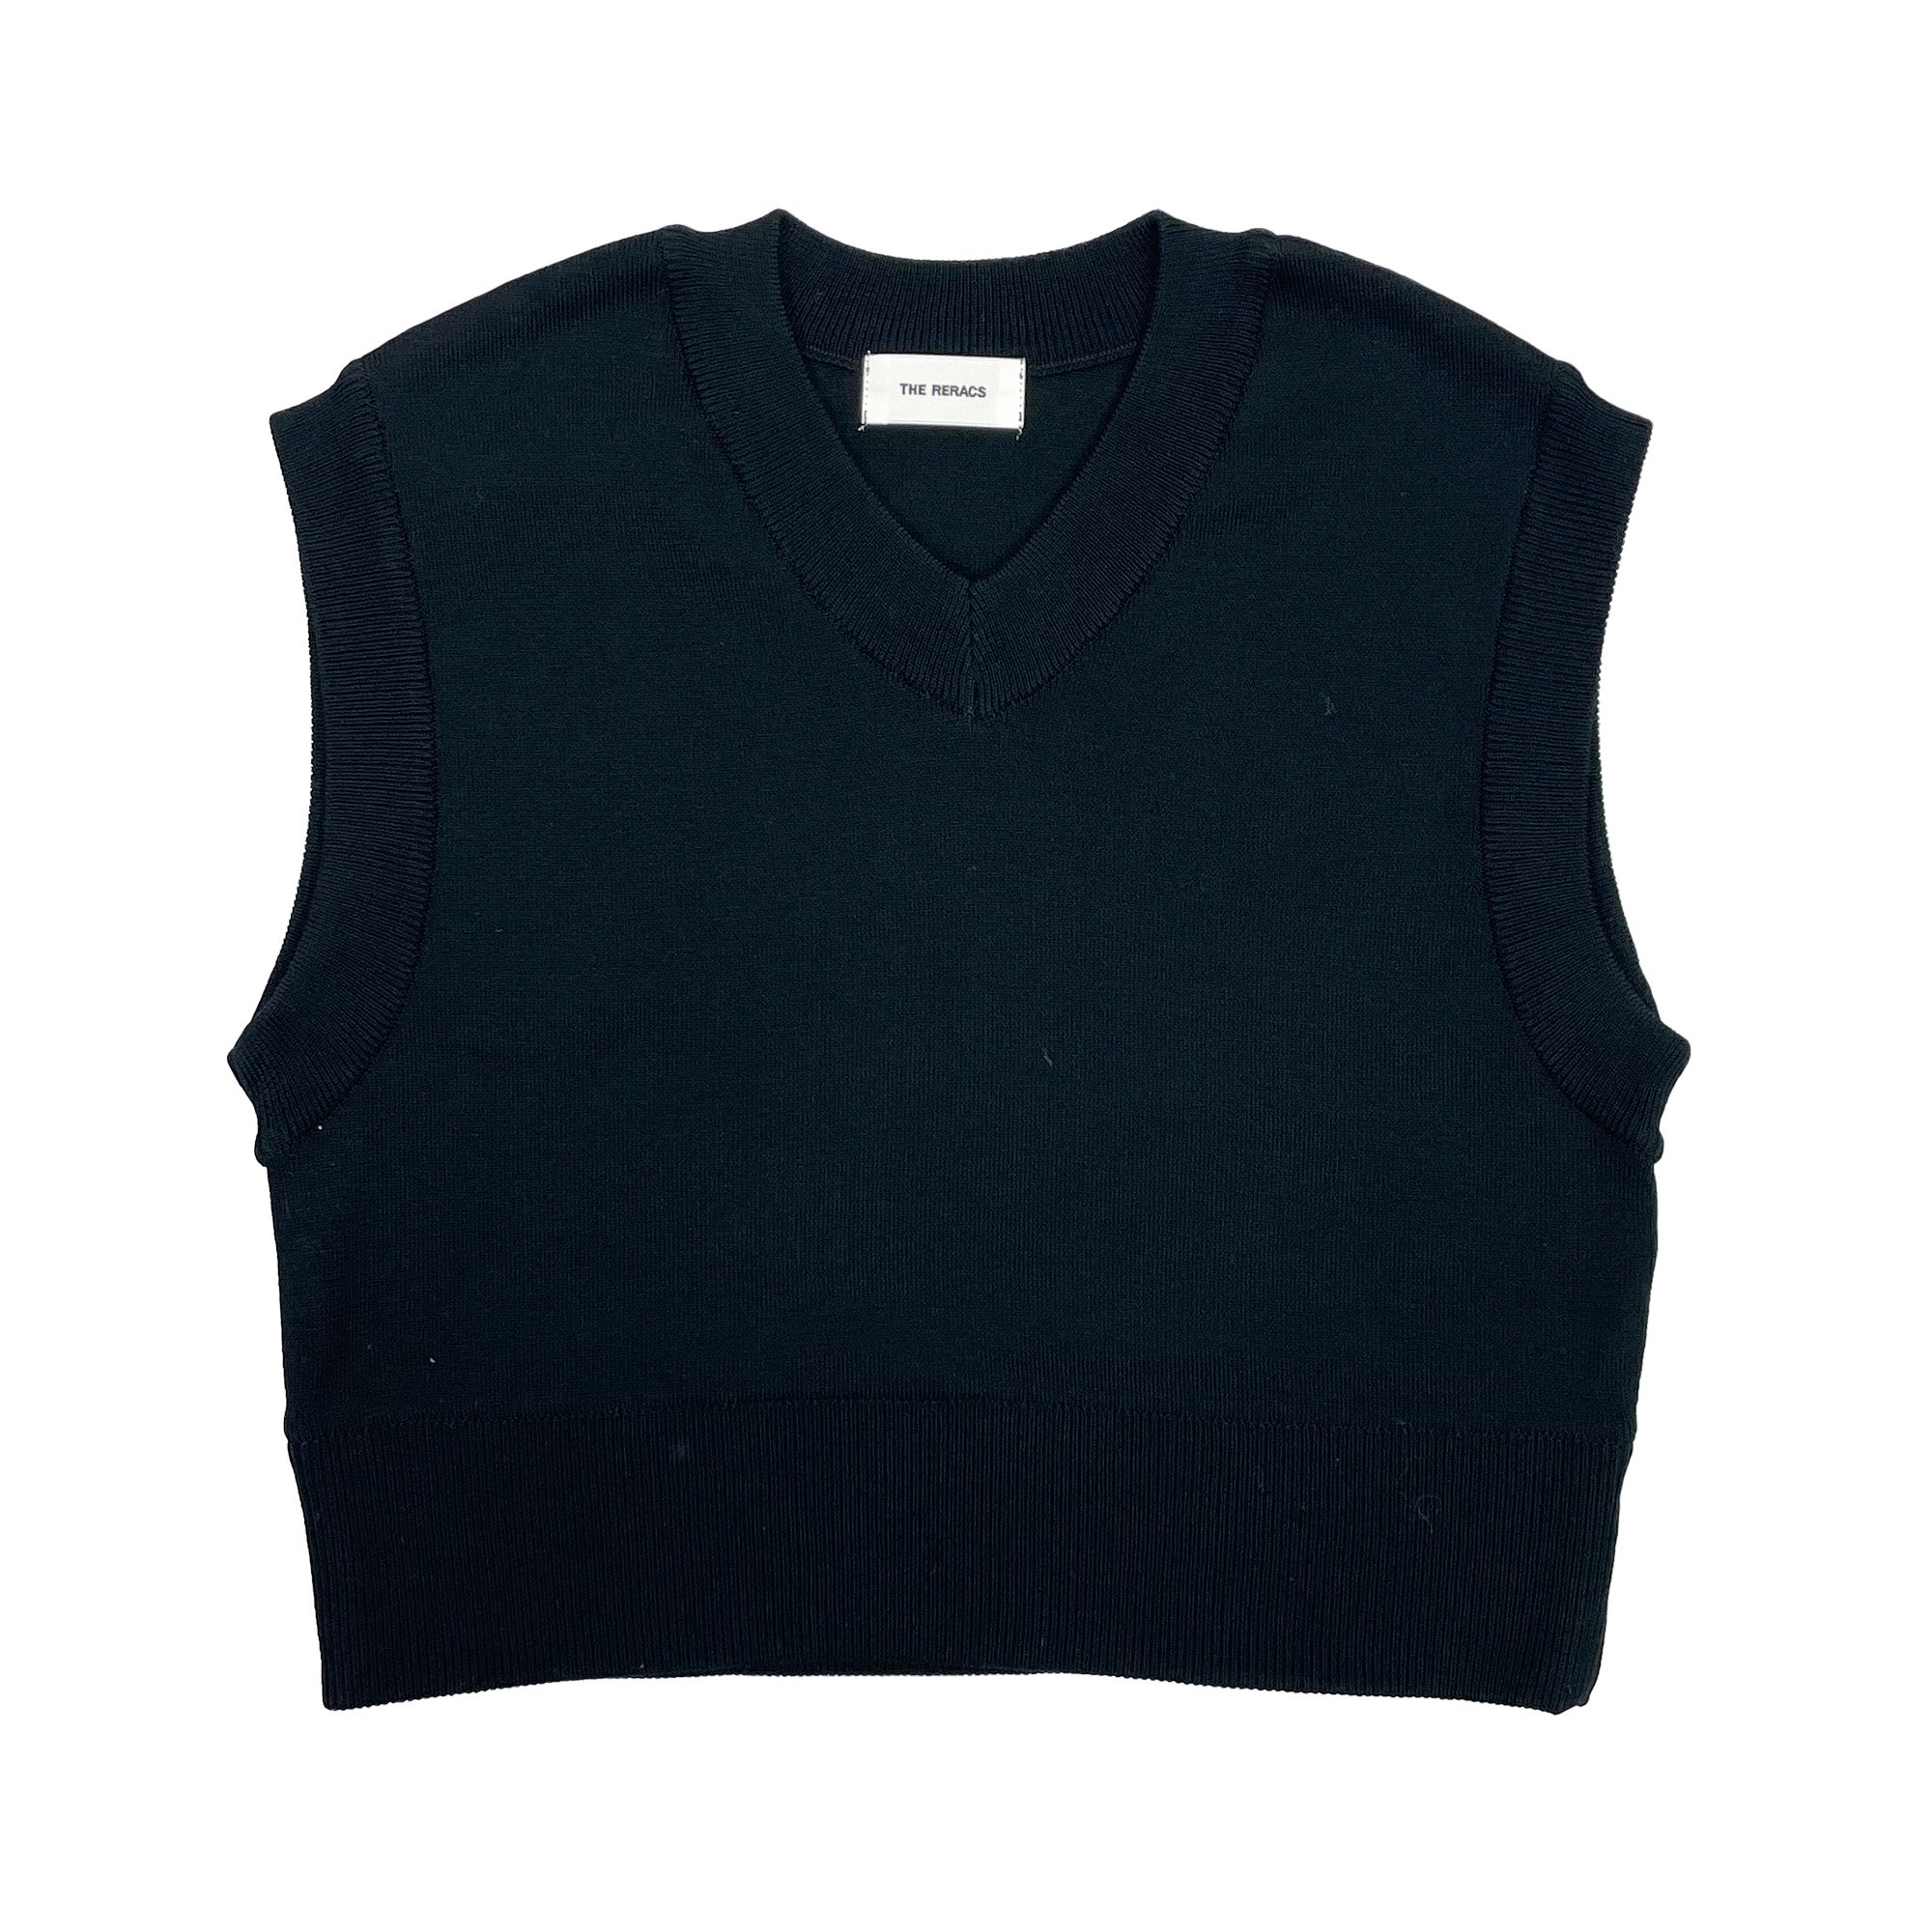 <img class='new_mark_img1' src='https://img.shop-pro.jp/img/new/icons7.gif' style='border:none;display:inline;margin:0px;padding:0px;width:auto;' />THE RERACS V-NECK KNIT VEST